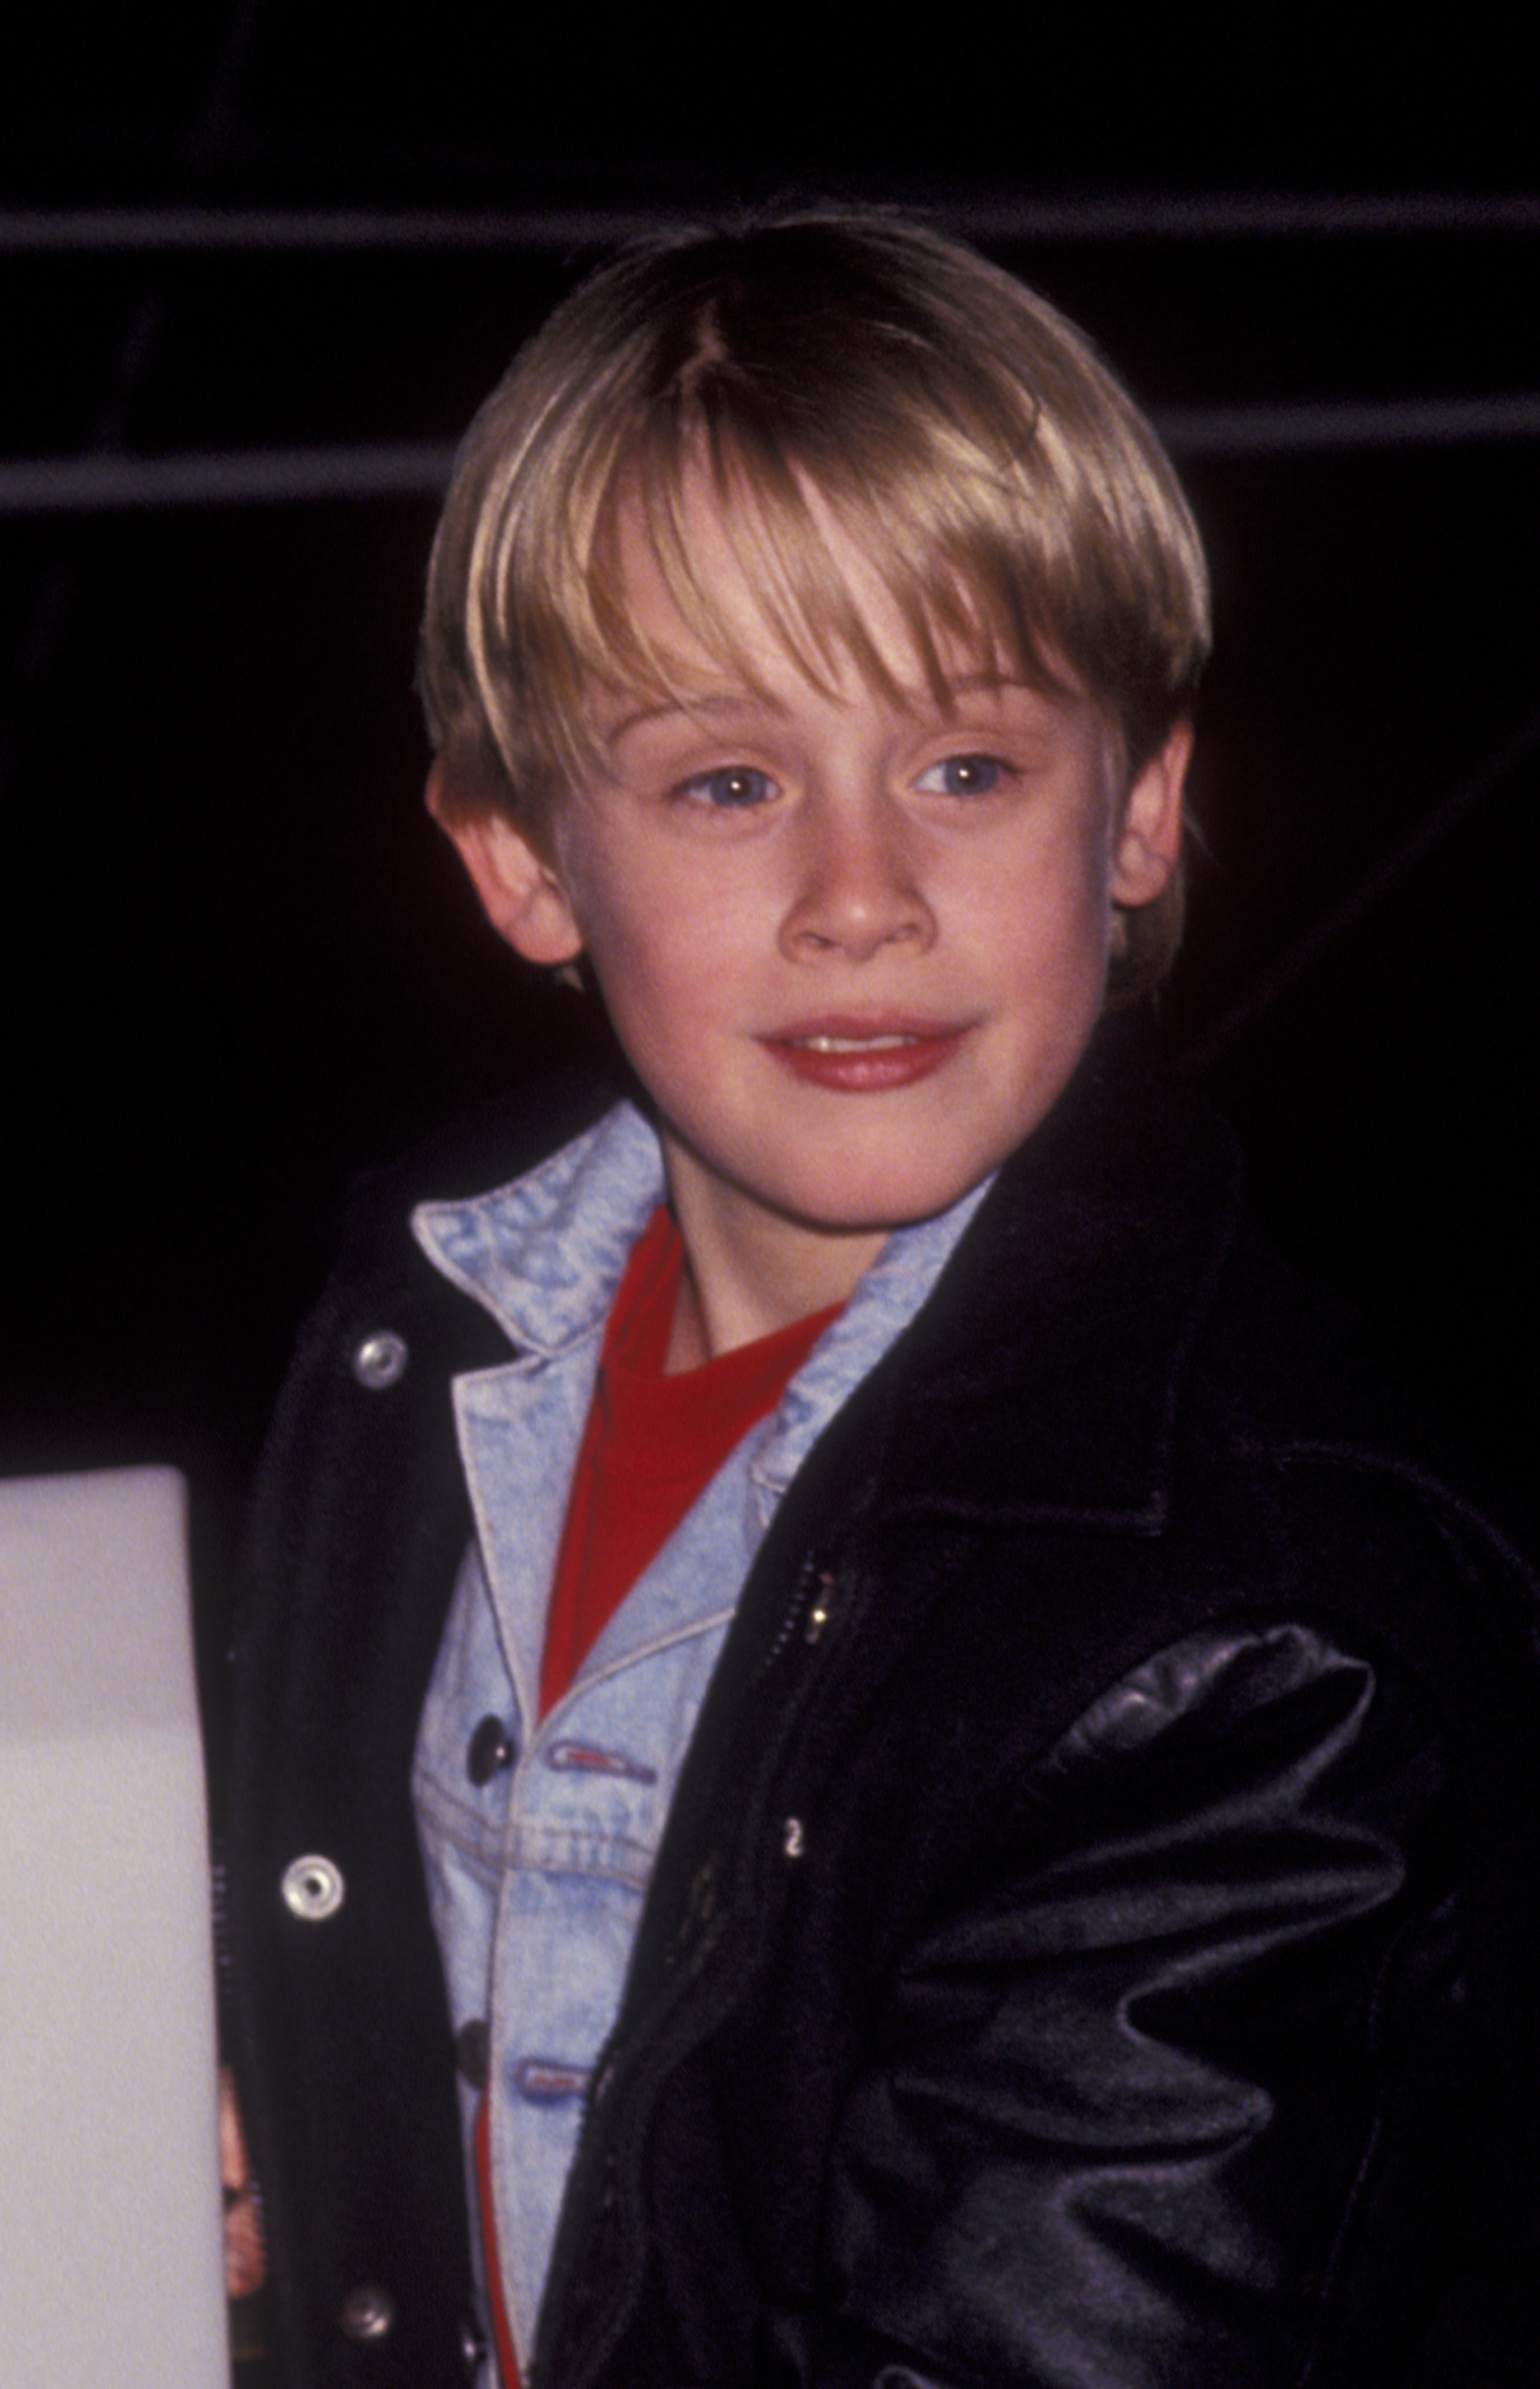 Macaulay Culkin during the "Light Up A Life Benefit" for Children's EMS Foundation in New York City on November 13, 1991 | Source: Getty Images